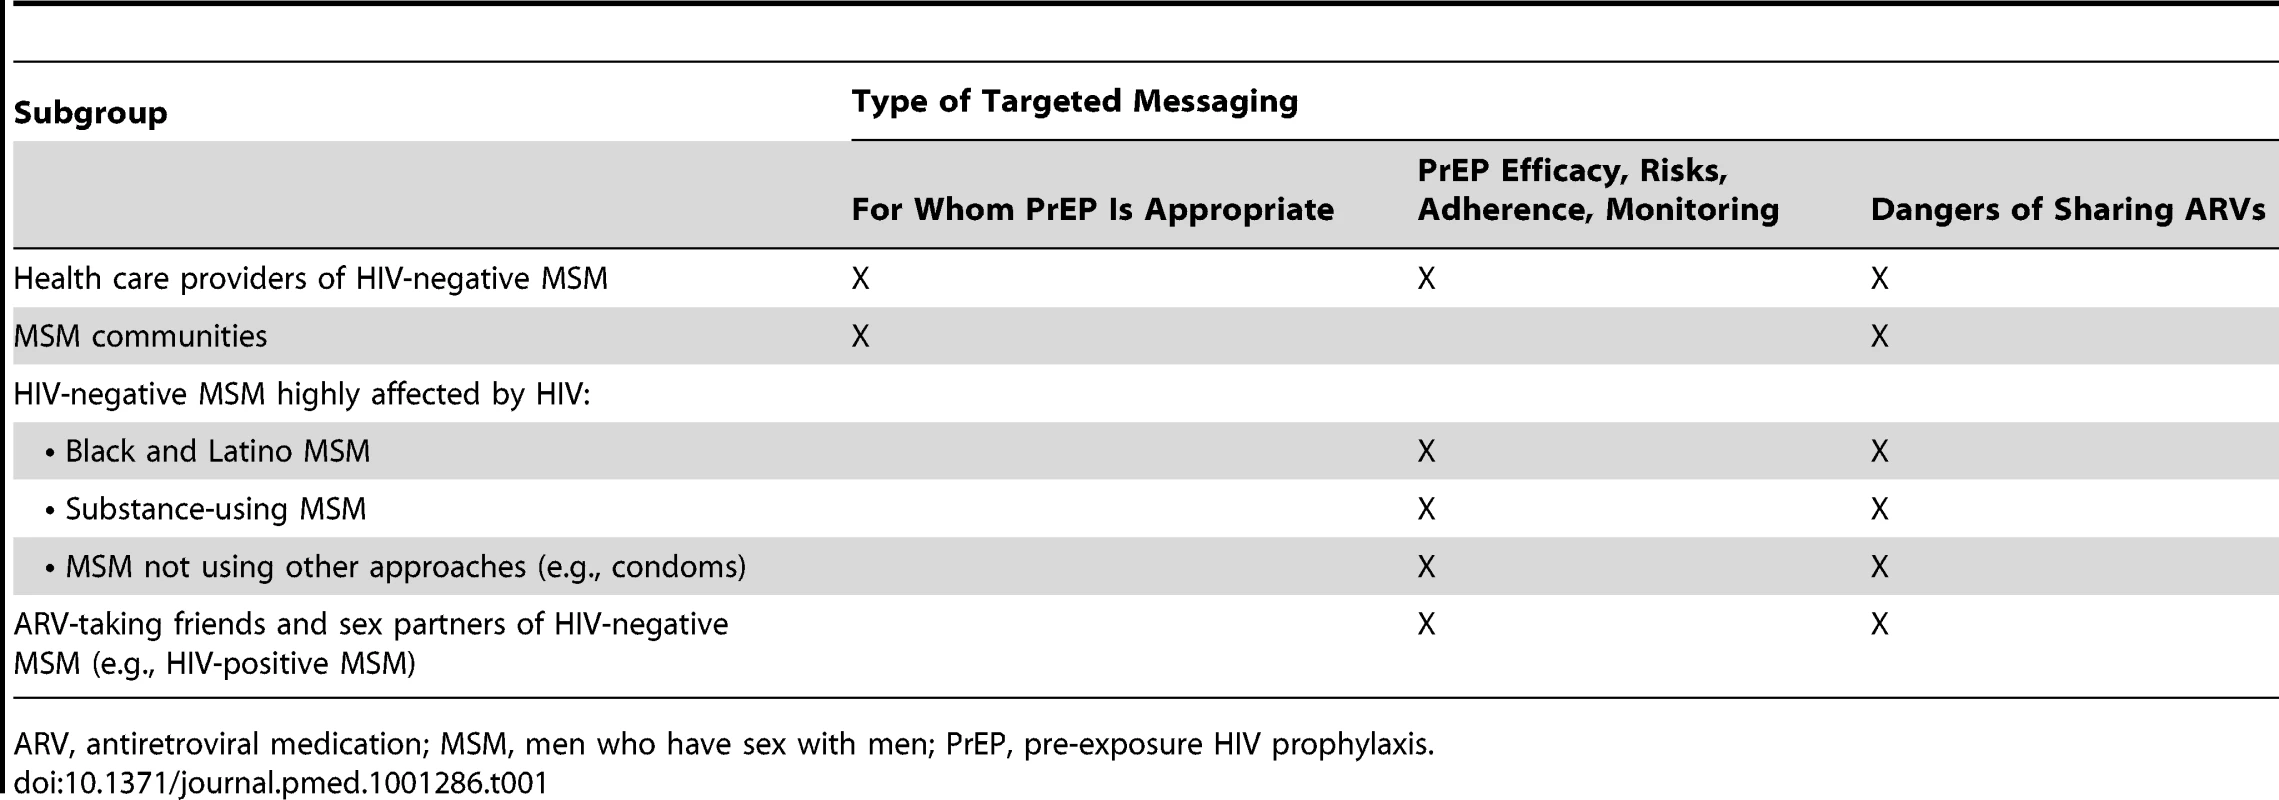 Types of targeted PrEP messaging needed for MSM and health care providers by subgroup.